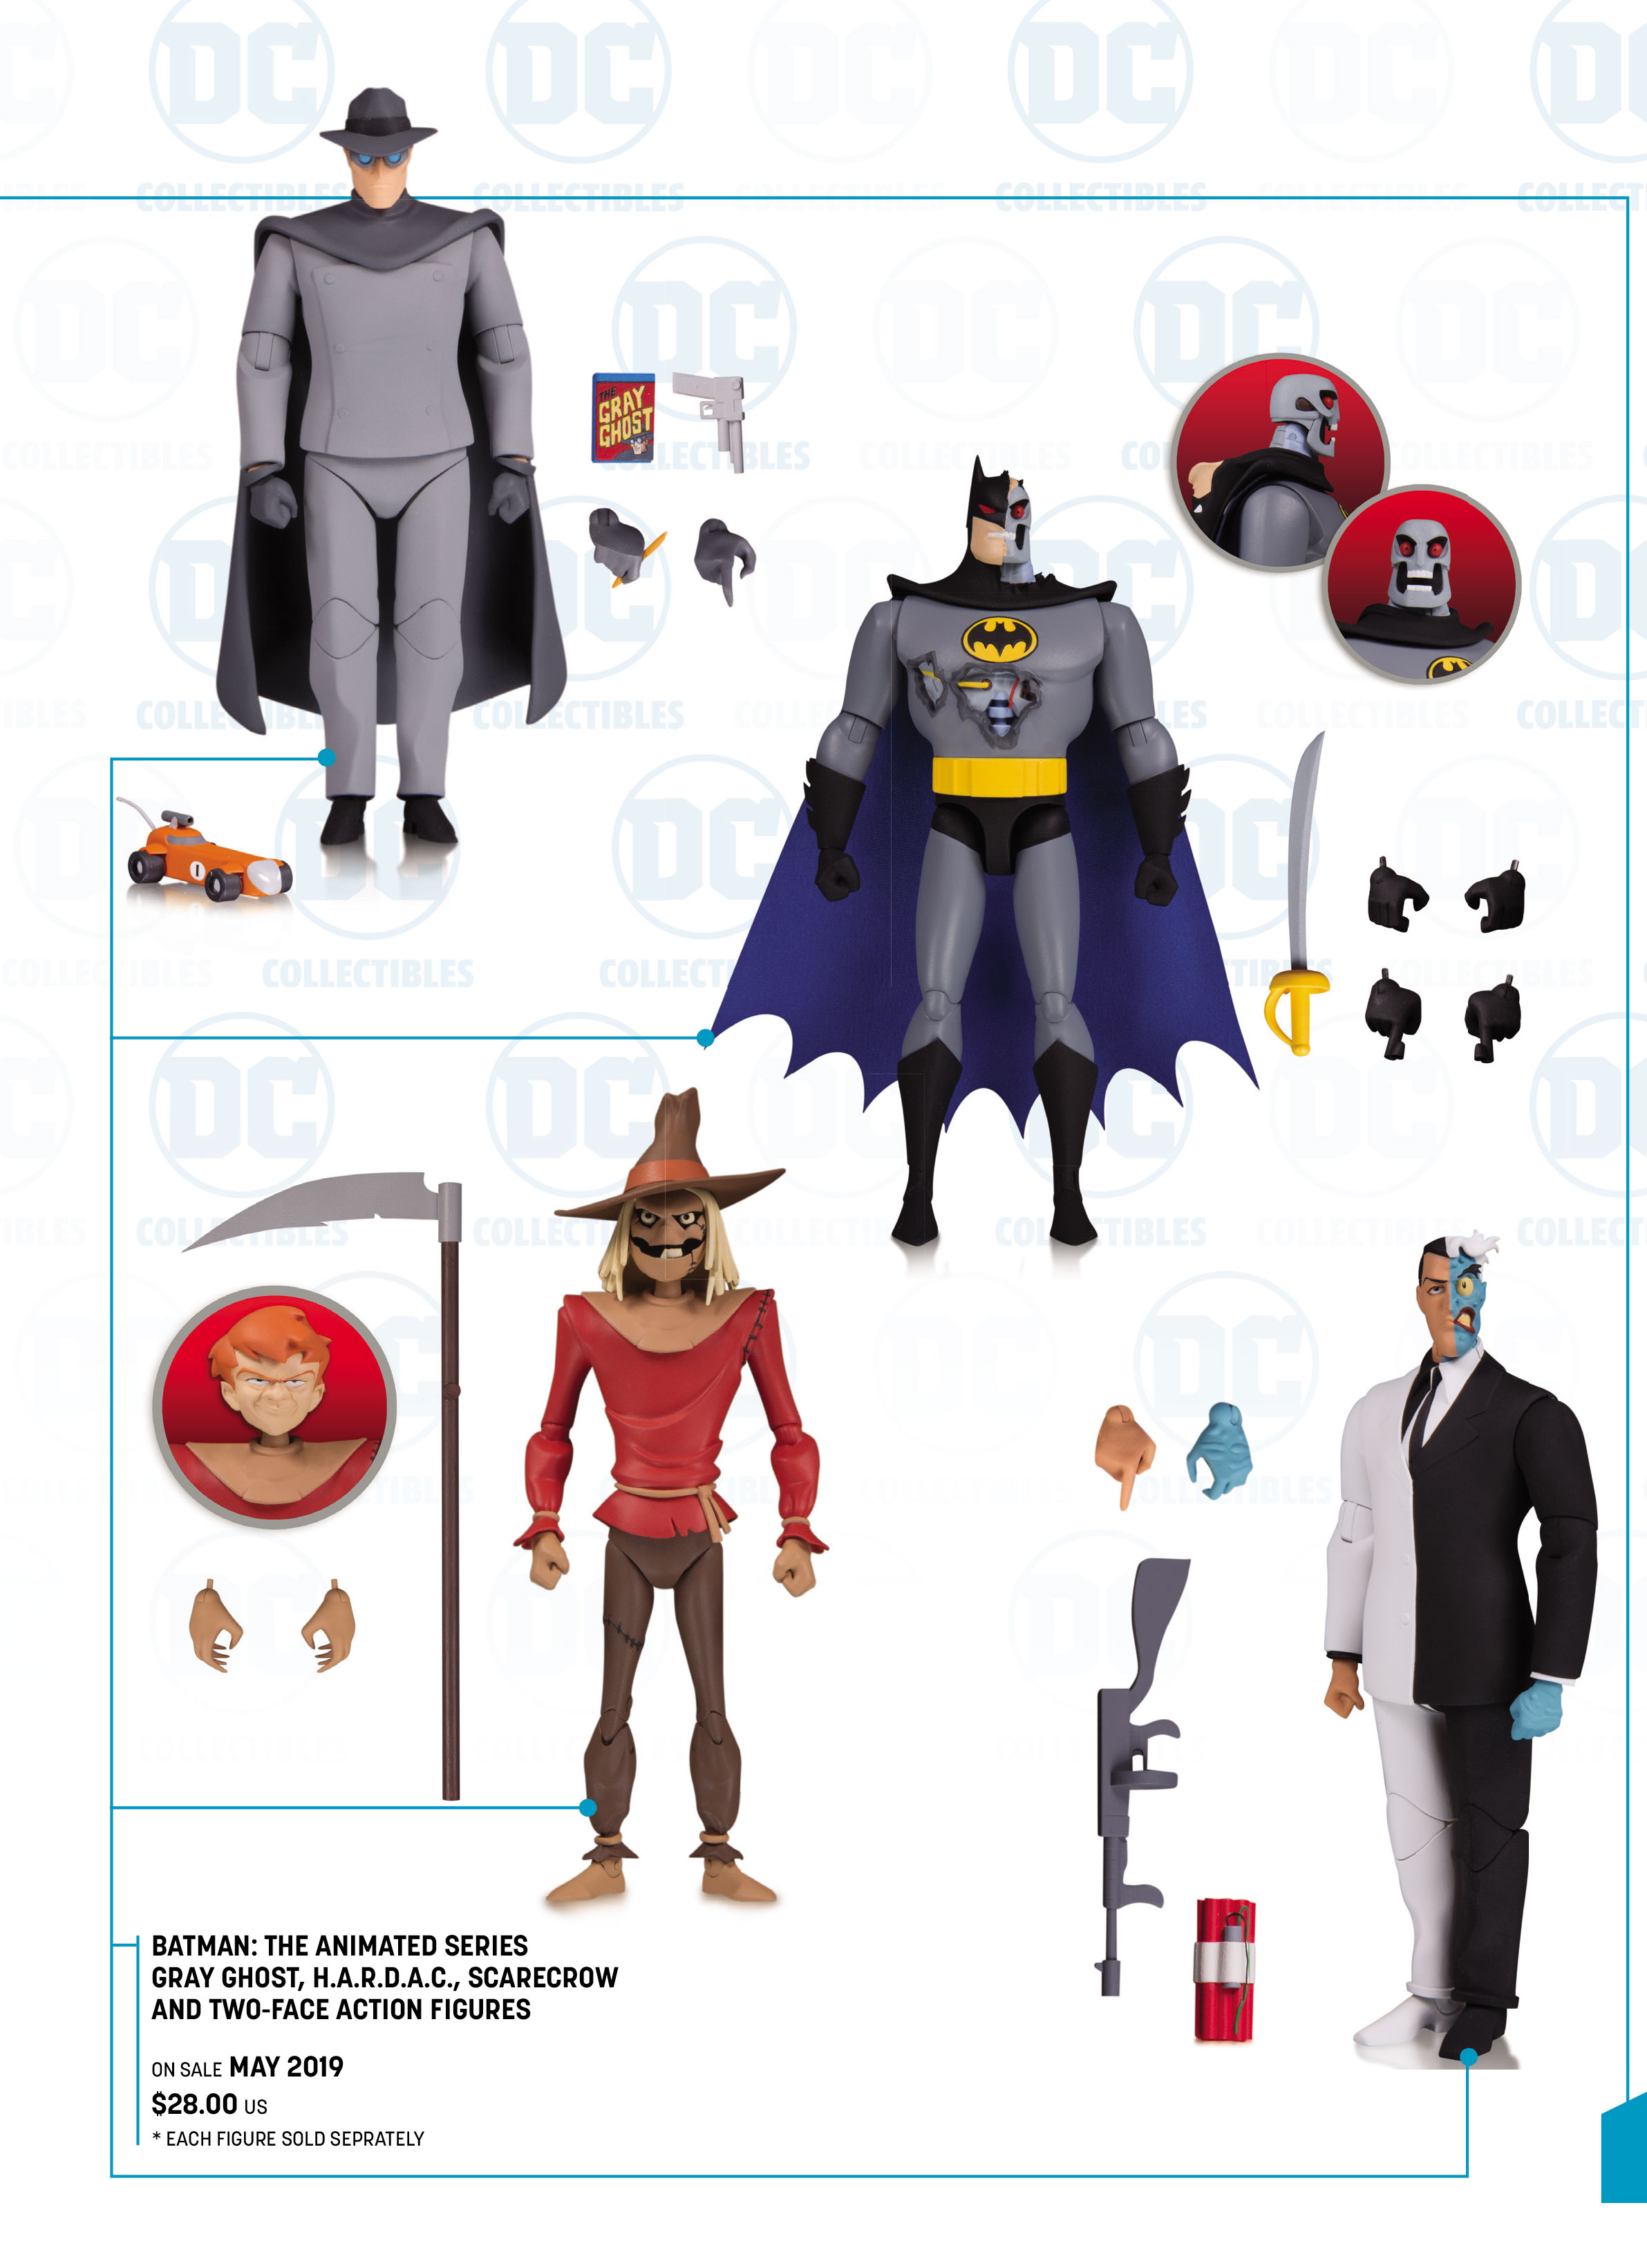 dc collectibles stands